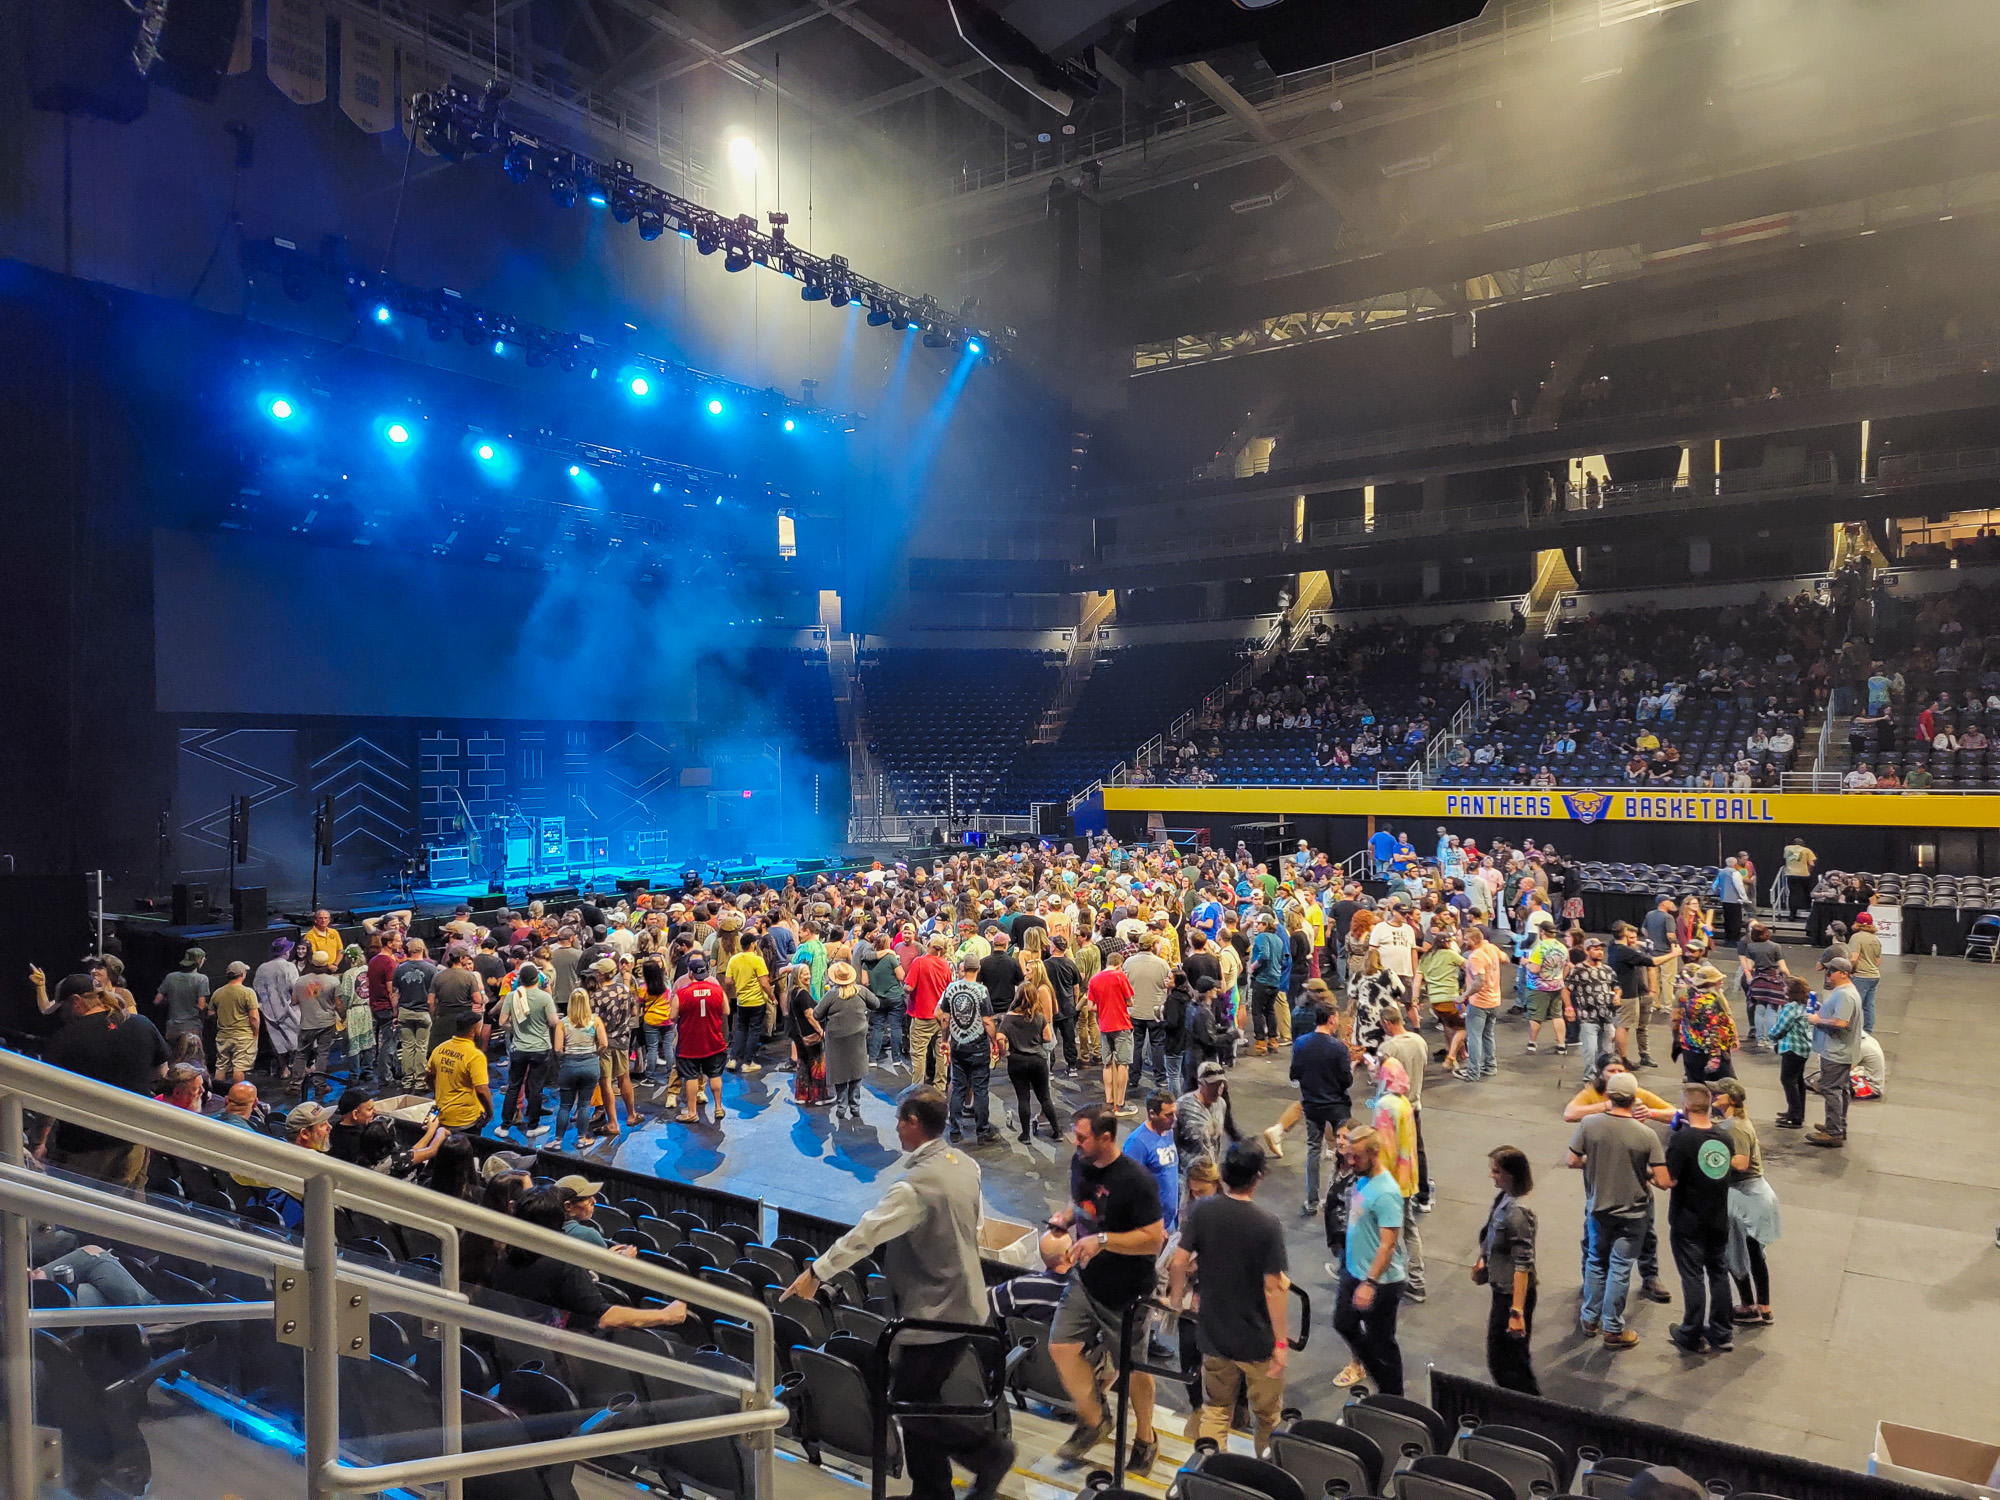 Concerts at the Petersen Events Center